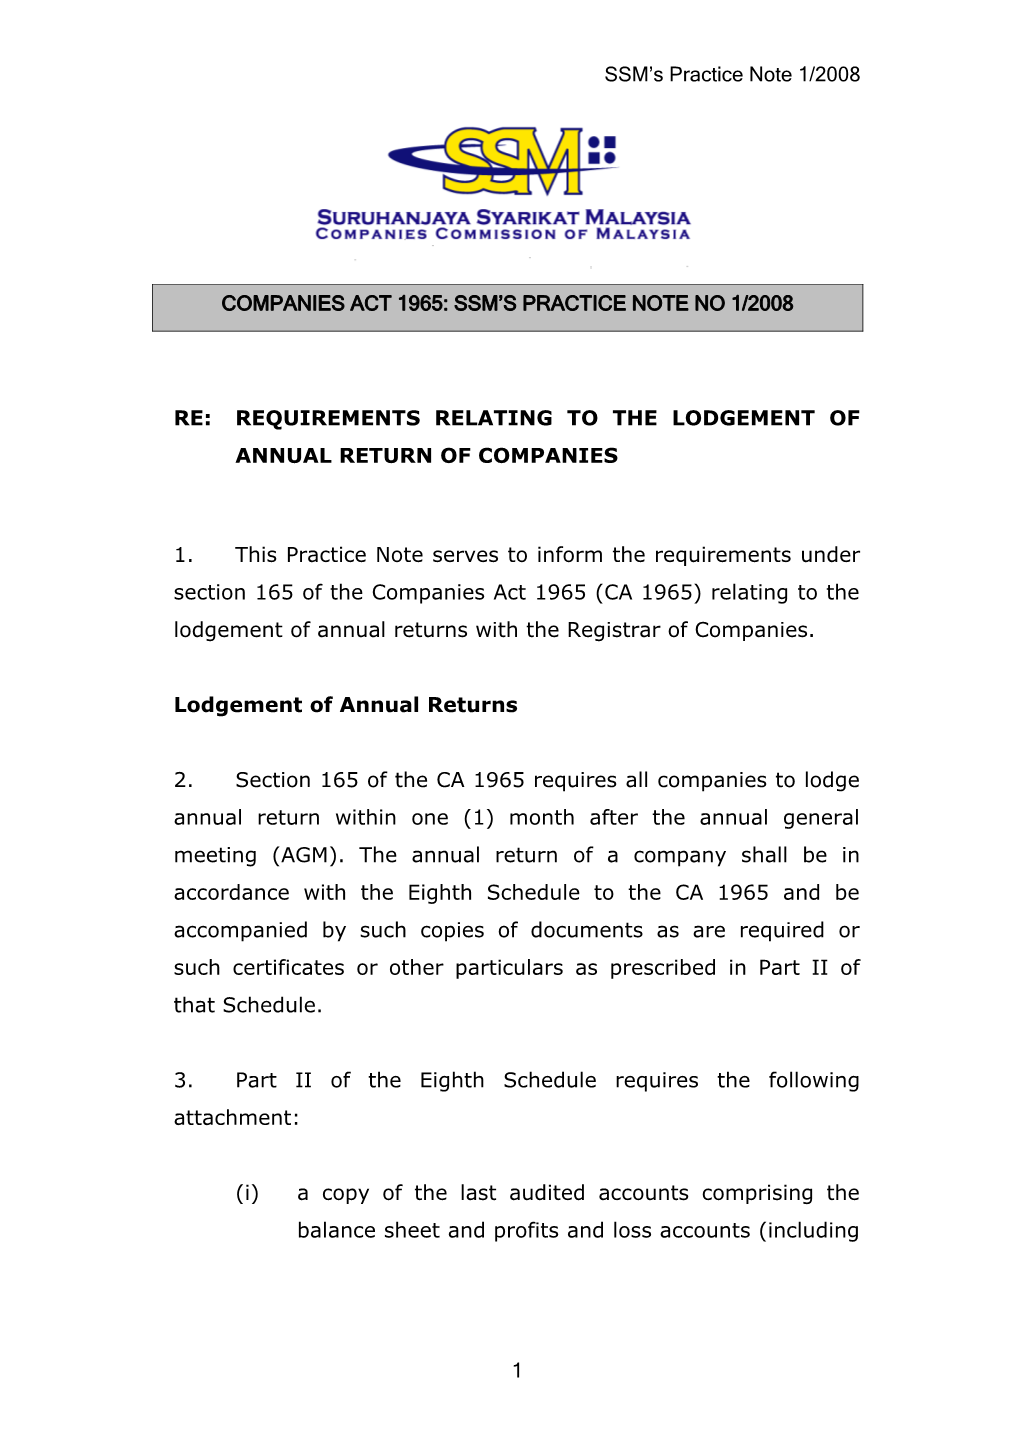 Re: Requirements Relating to the Lodgement of Annual Return of Companies